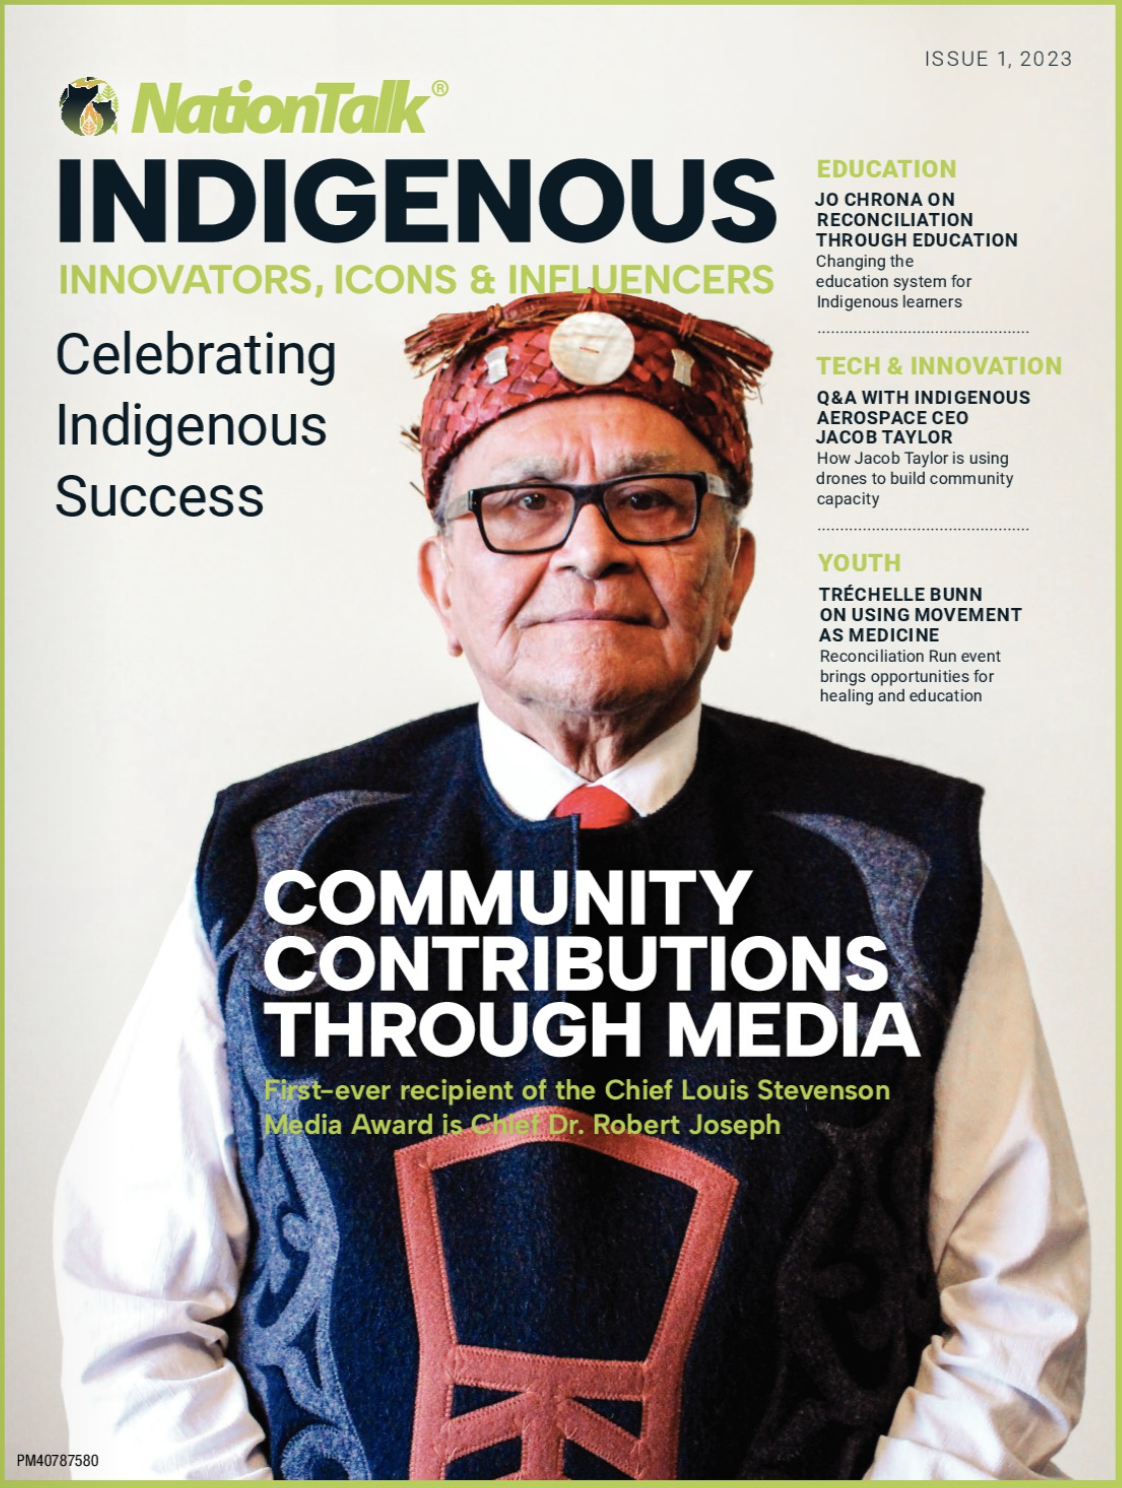 kama.ai Featured In NationTalk’s Indigenous Innovators, Icons & Influencers